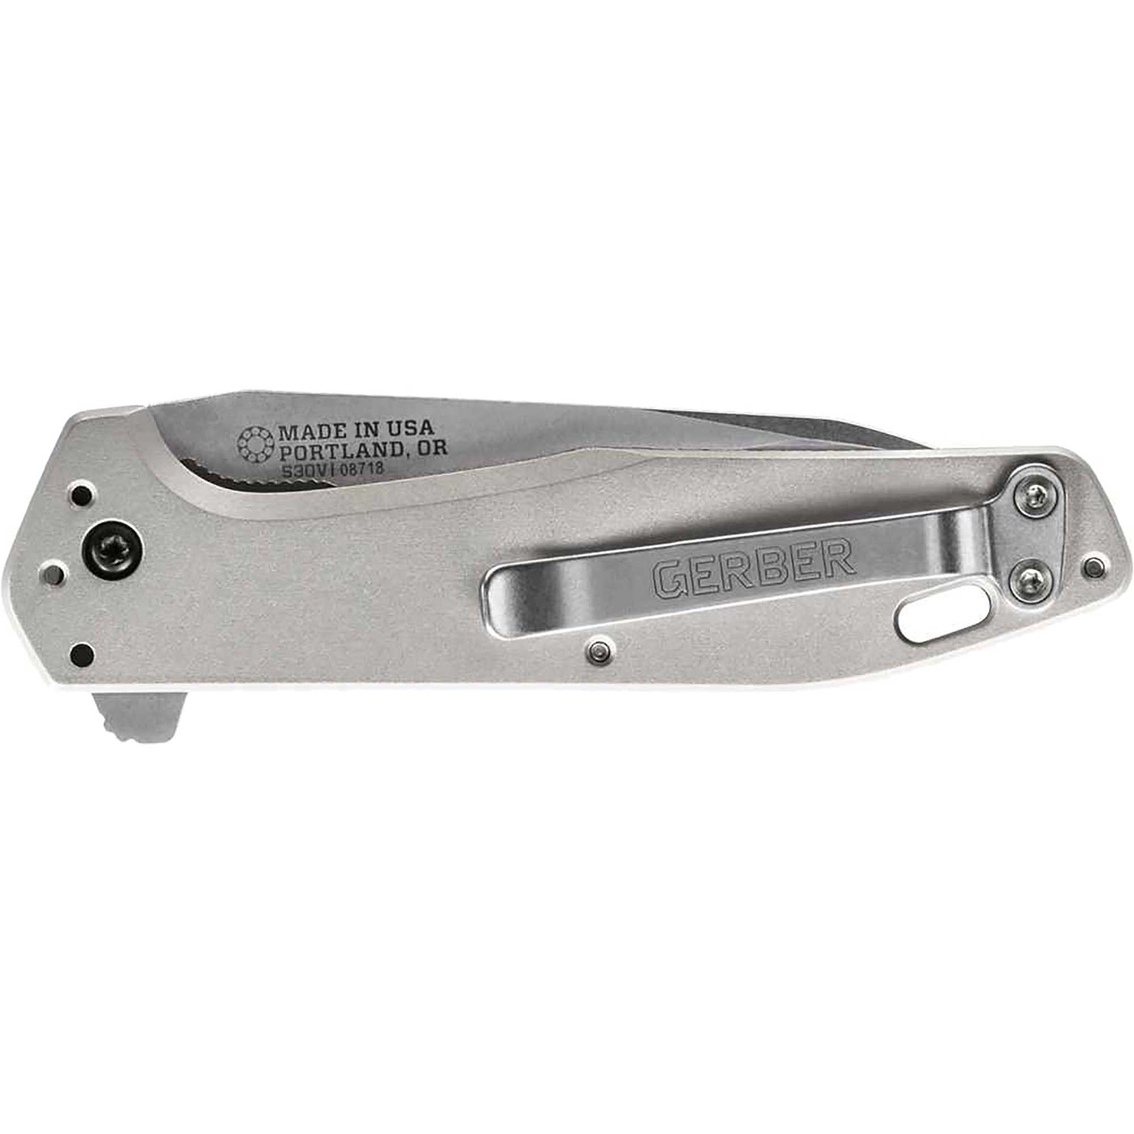 Gerber Knives and Tools Fastball, Grey FE Knife - Image 3 of 4